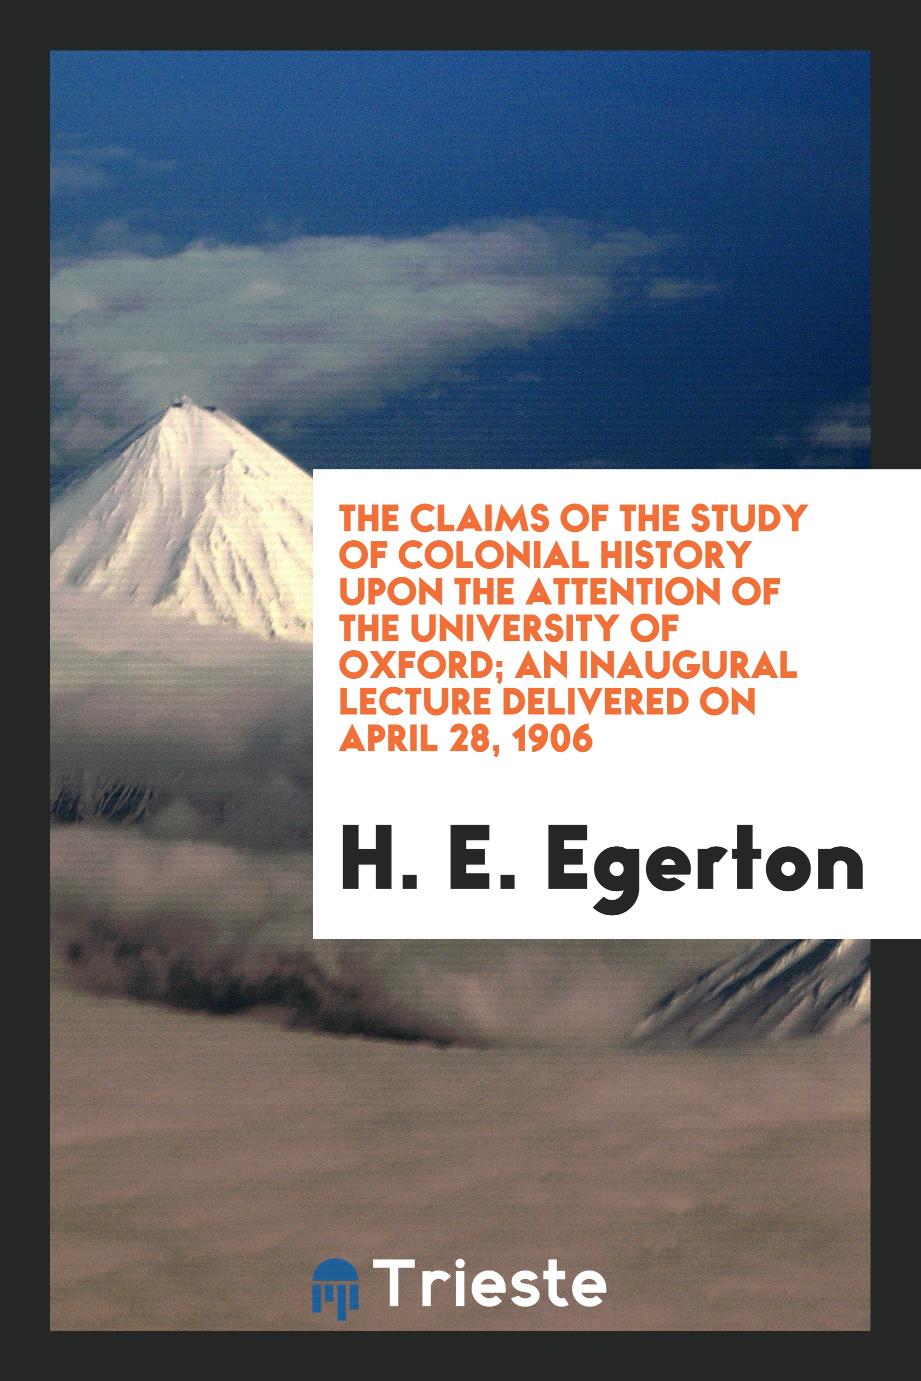 The claims of the study of colonial history upon the attention of the University of Oxford; an inaugural lecture delivered on April 28, 1906